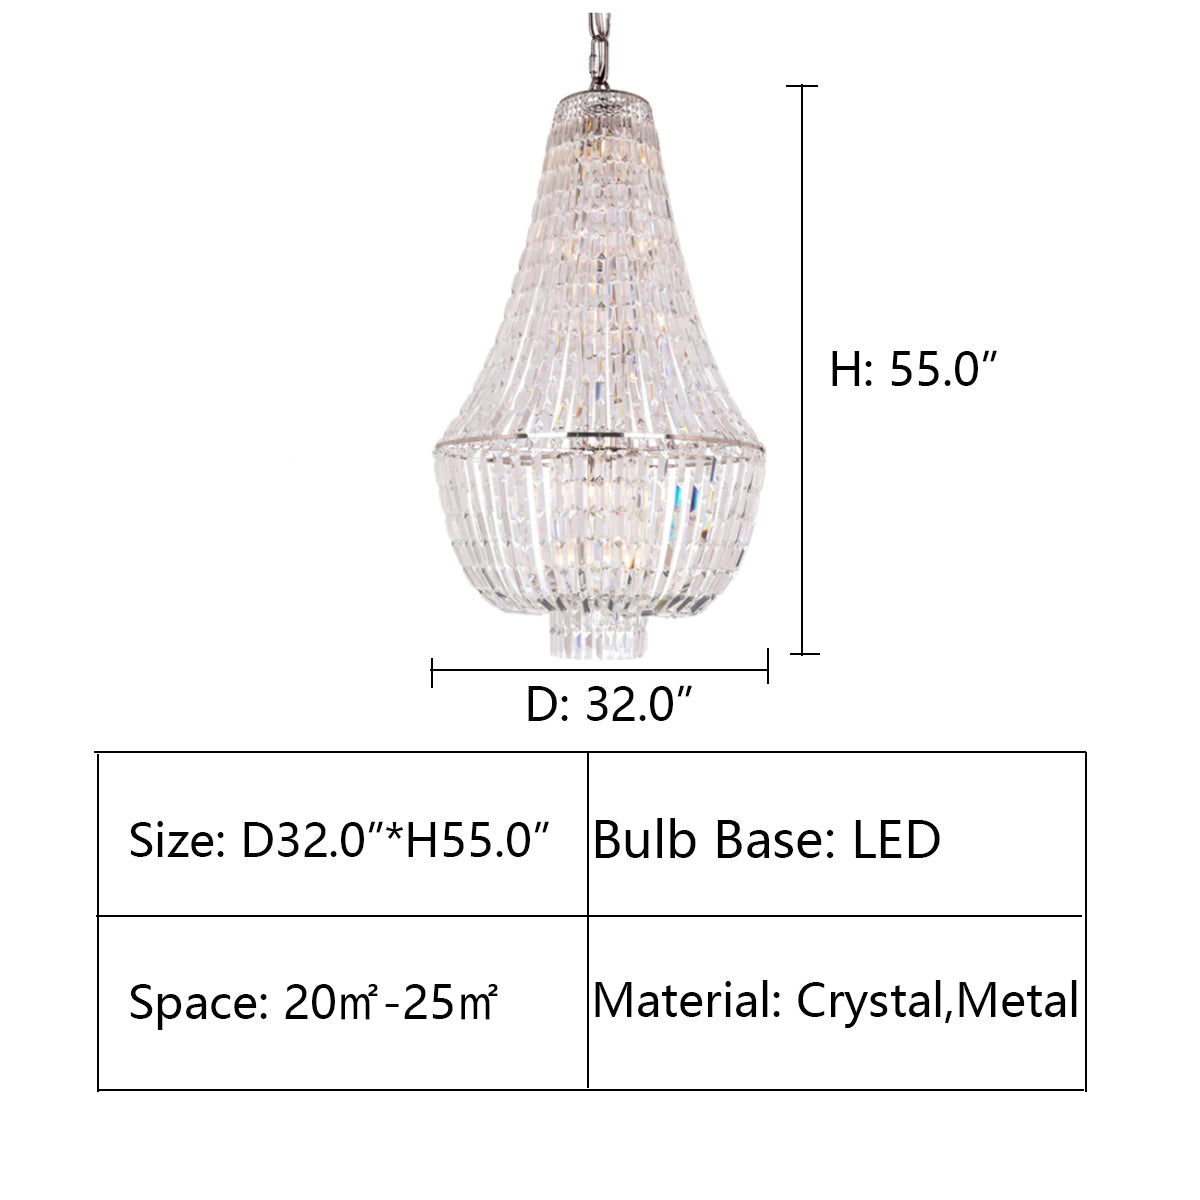 D32.0"*H55.0" Andreas Empire Crystal Prysm Chandelier,chandelier,chandeliers,empire,round,crystal,pendant,metal,crystal chain,ceiling,oversized,large,extra large,huge,stairs,foyer,living room,entrys,hallway